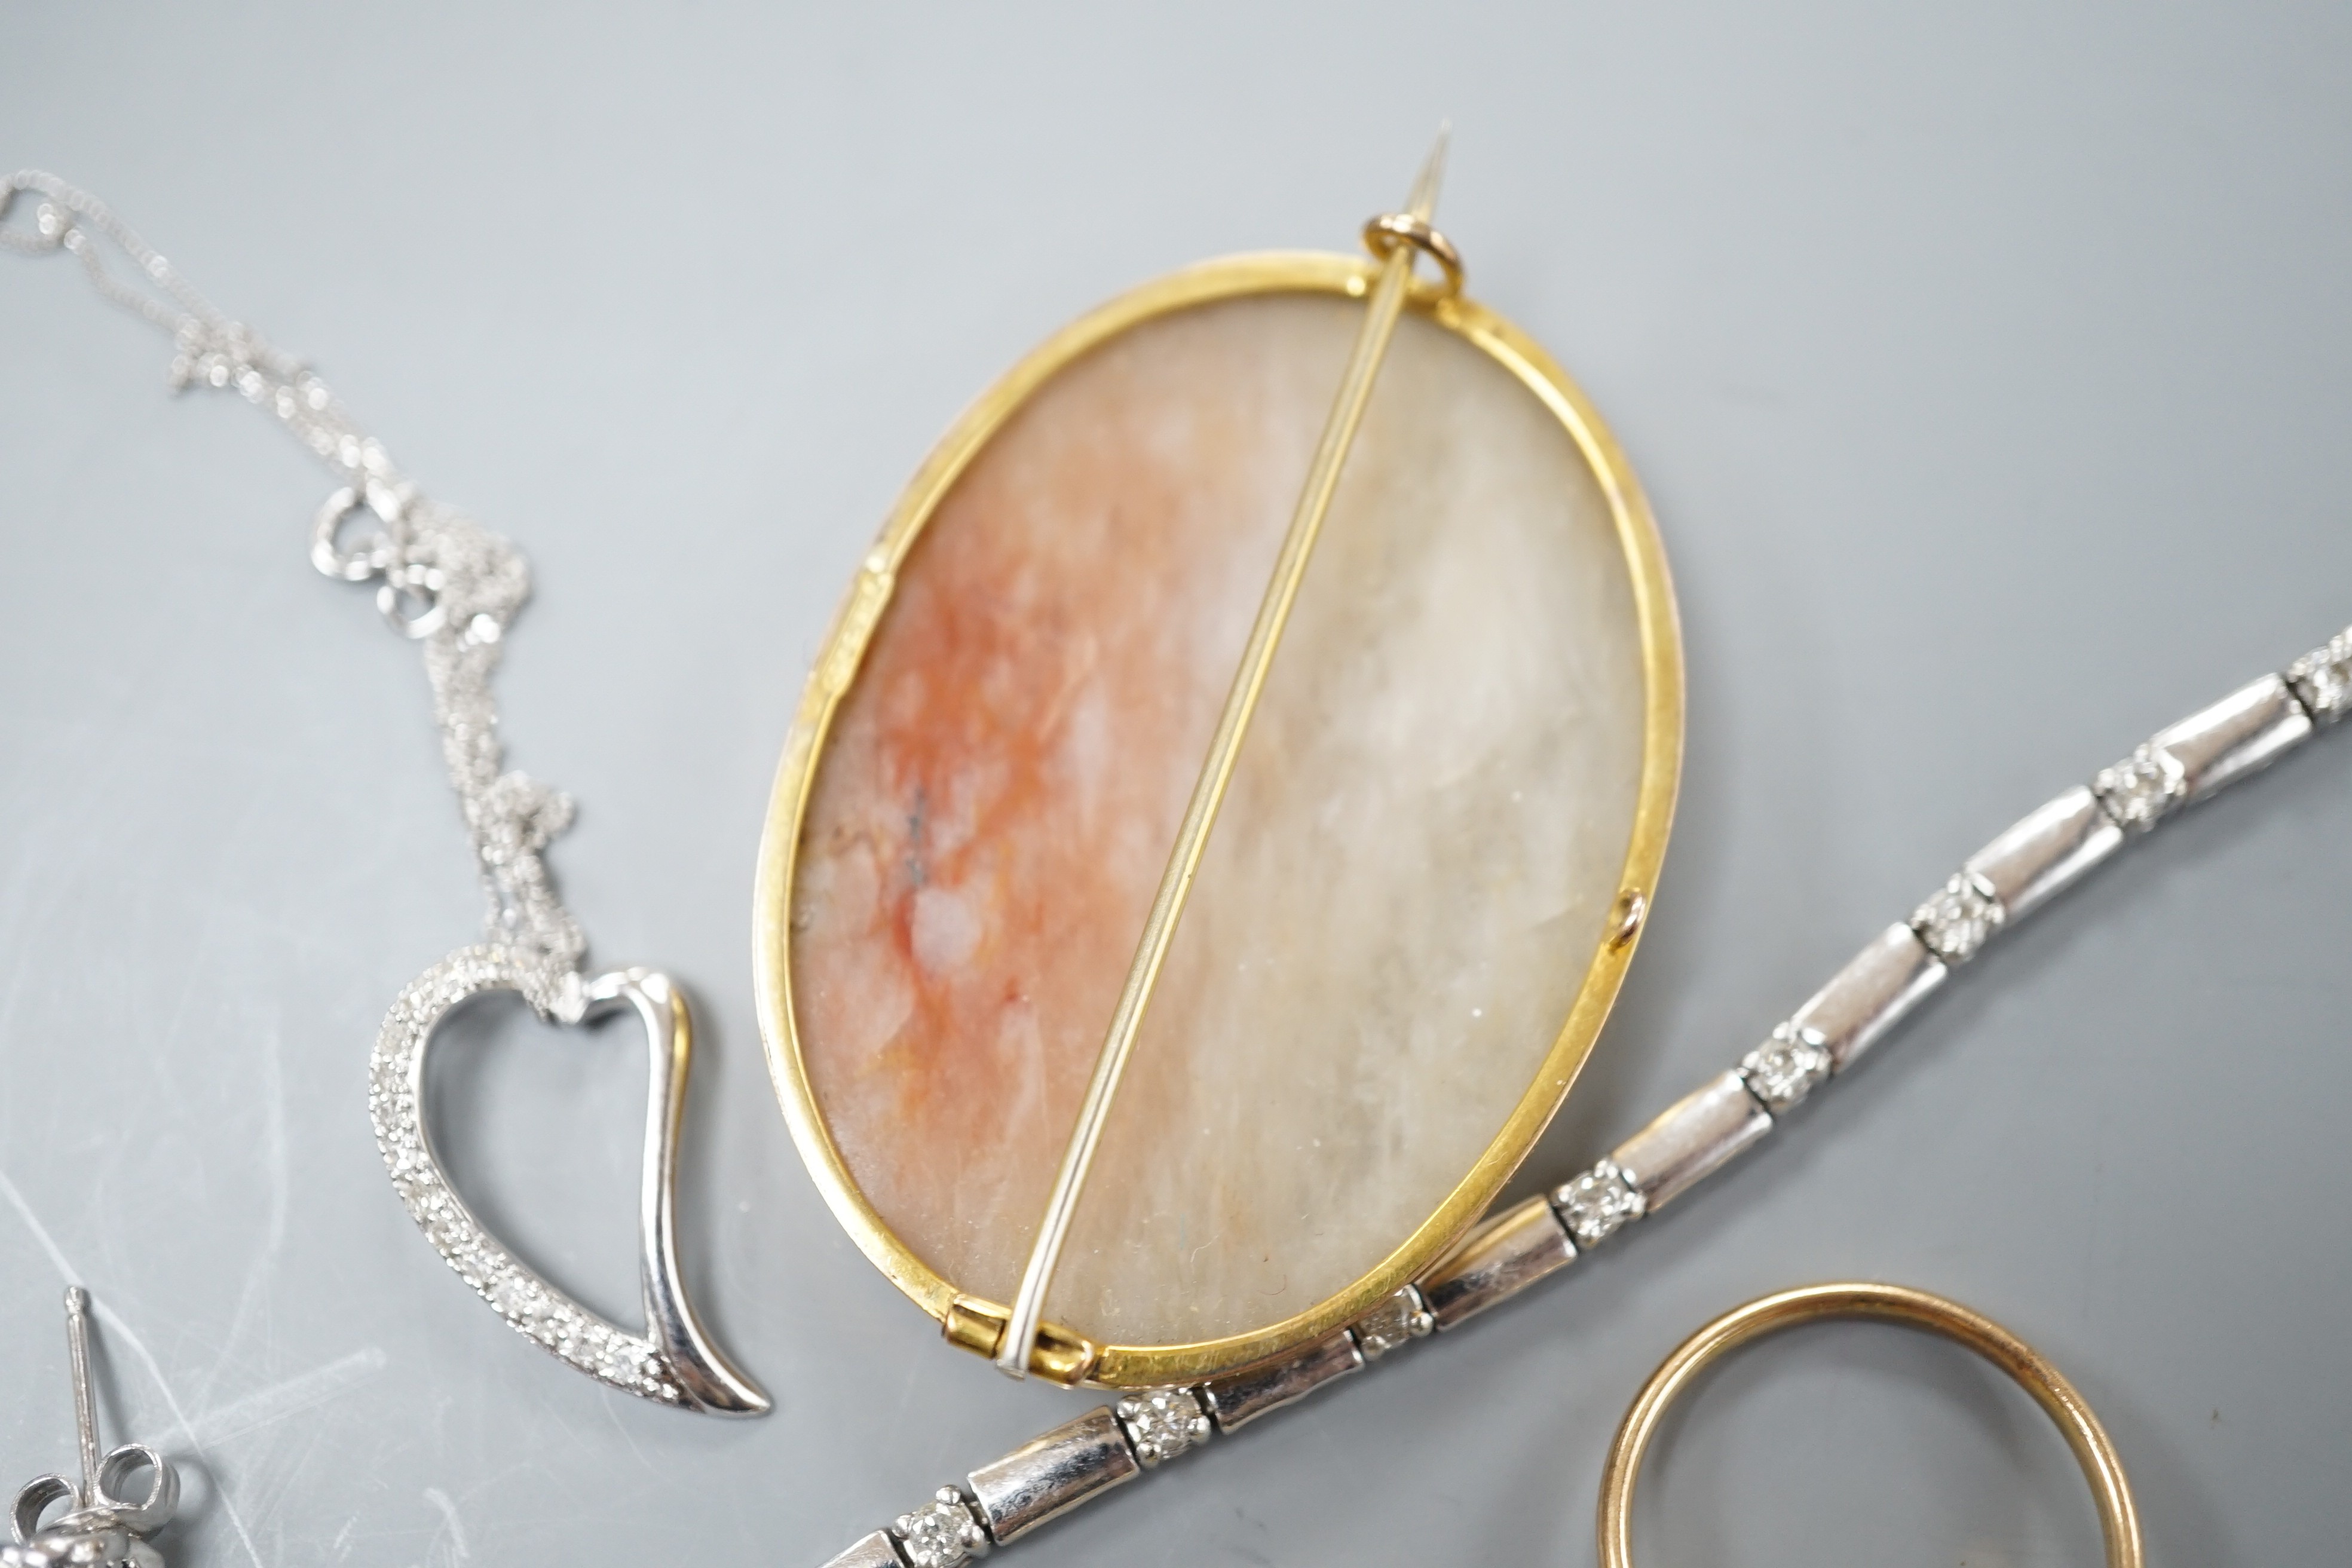 A 9kt white metal and diamond set bracelet, a 9ct mounted agate brooch, two rings including 18k, two pendants and a pair of modern diamond set ear studs.